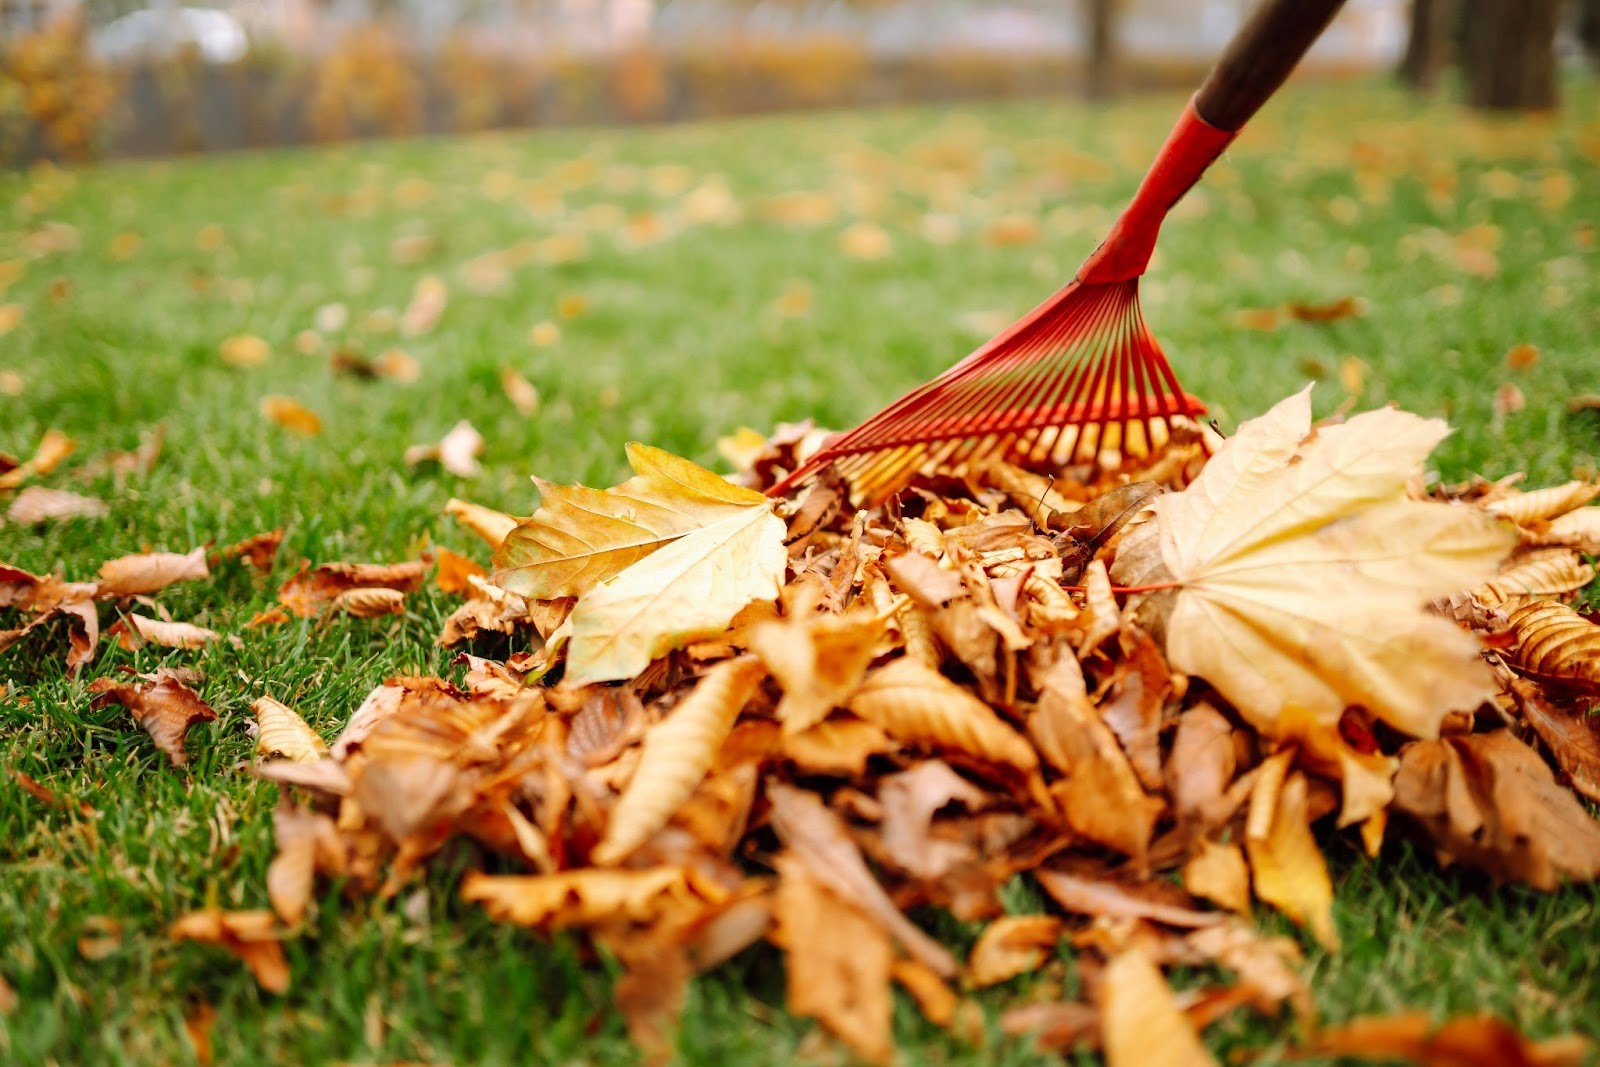 Raking leaves with a red rake on green grass